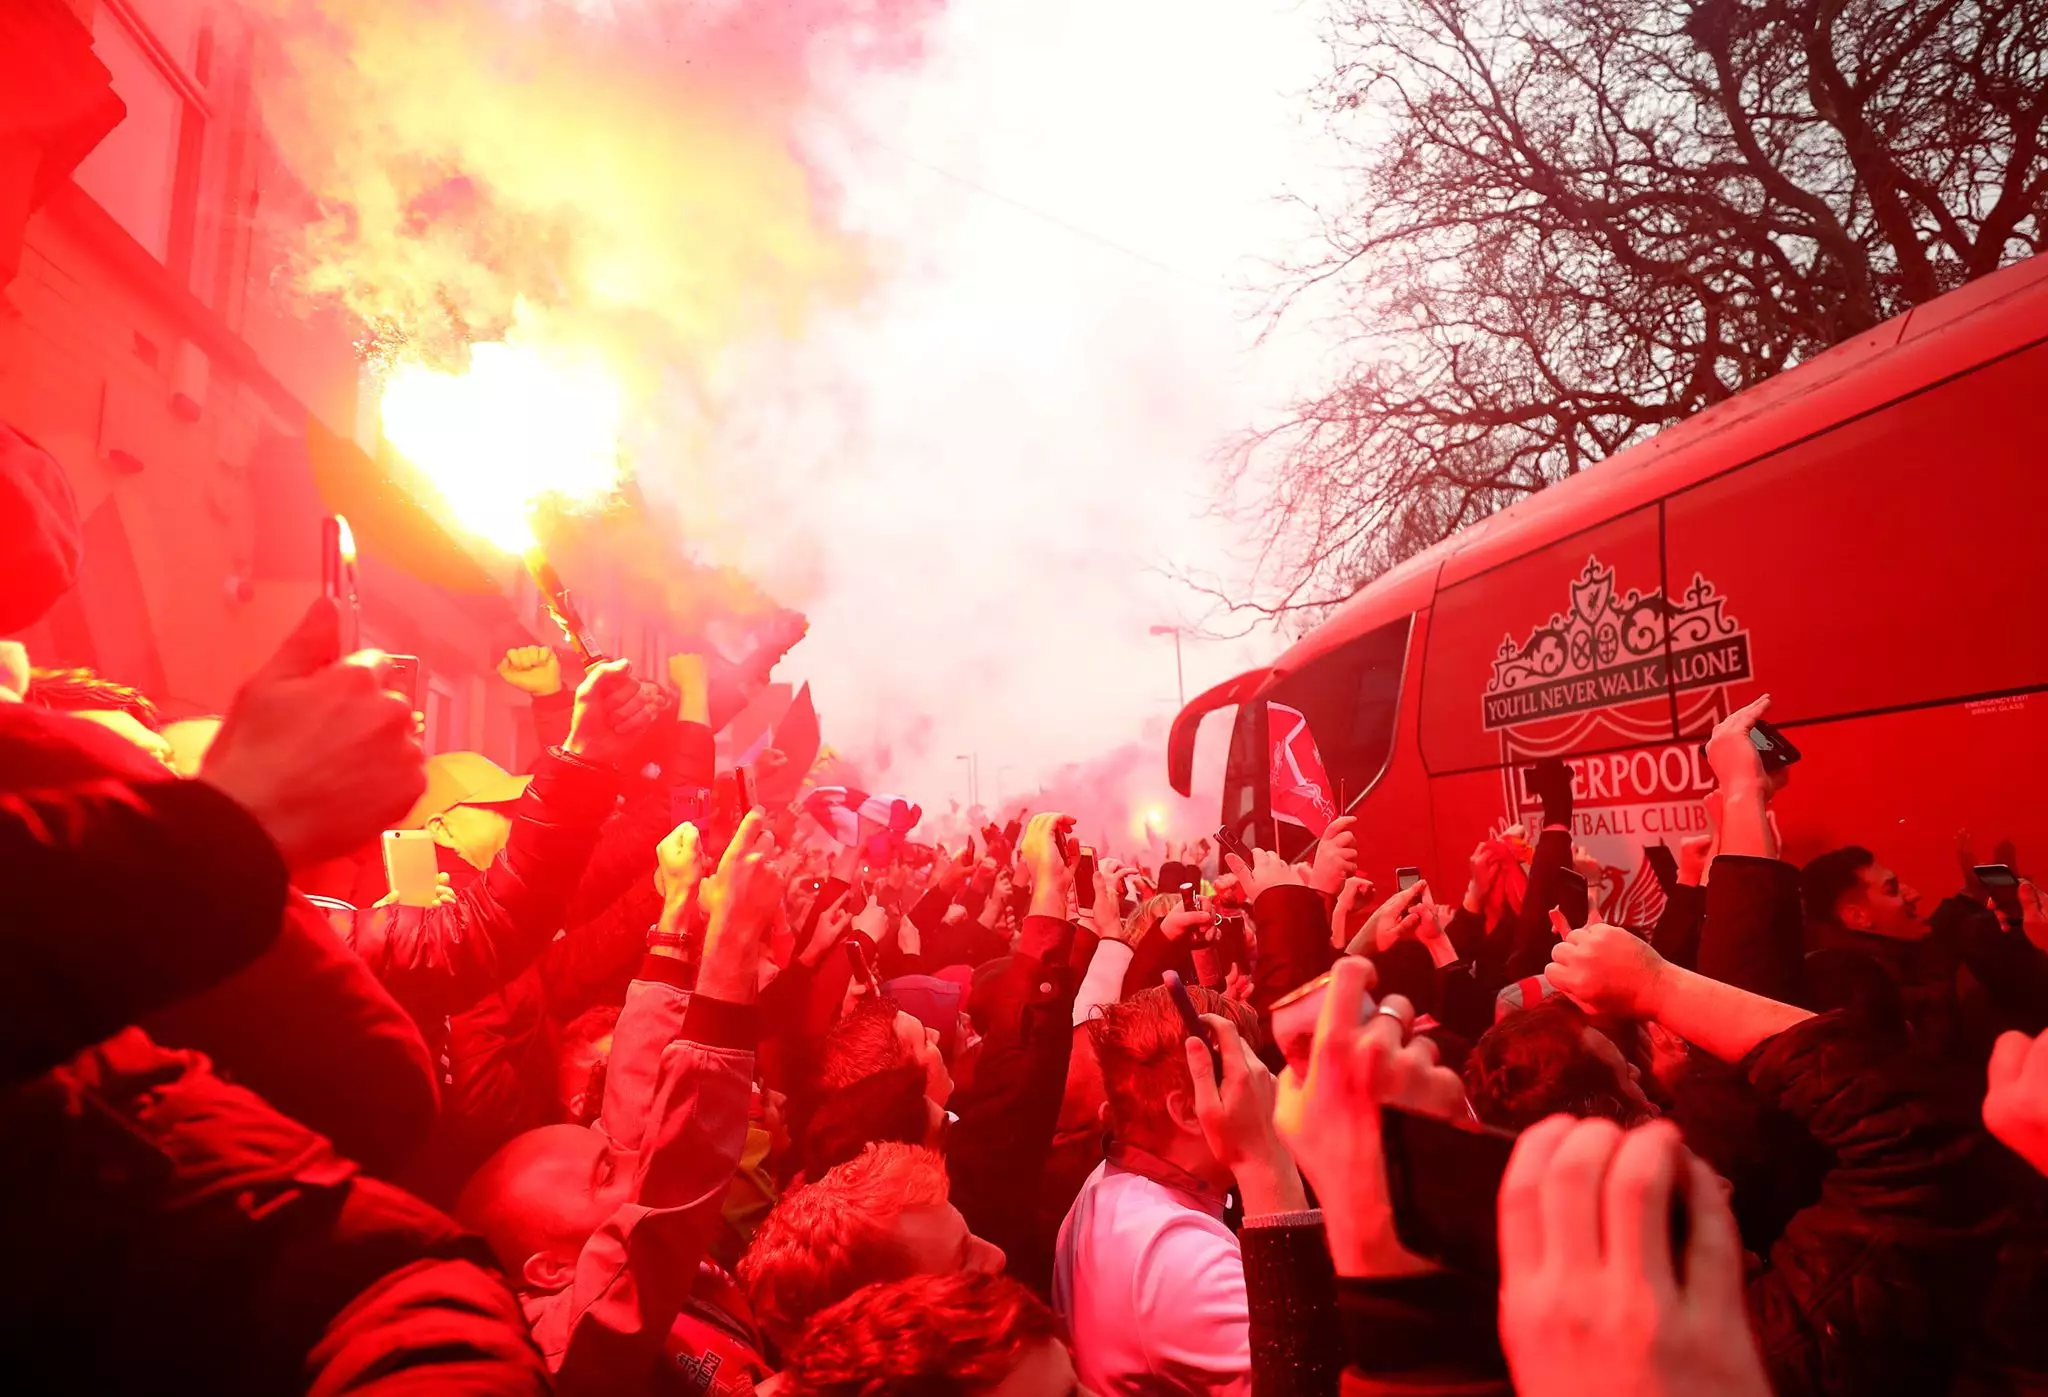 The Liverpool bus gets waved through. Image: PA Images